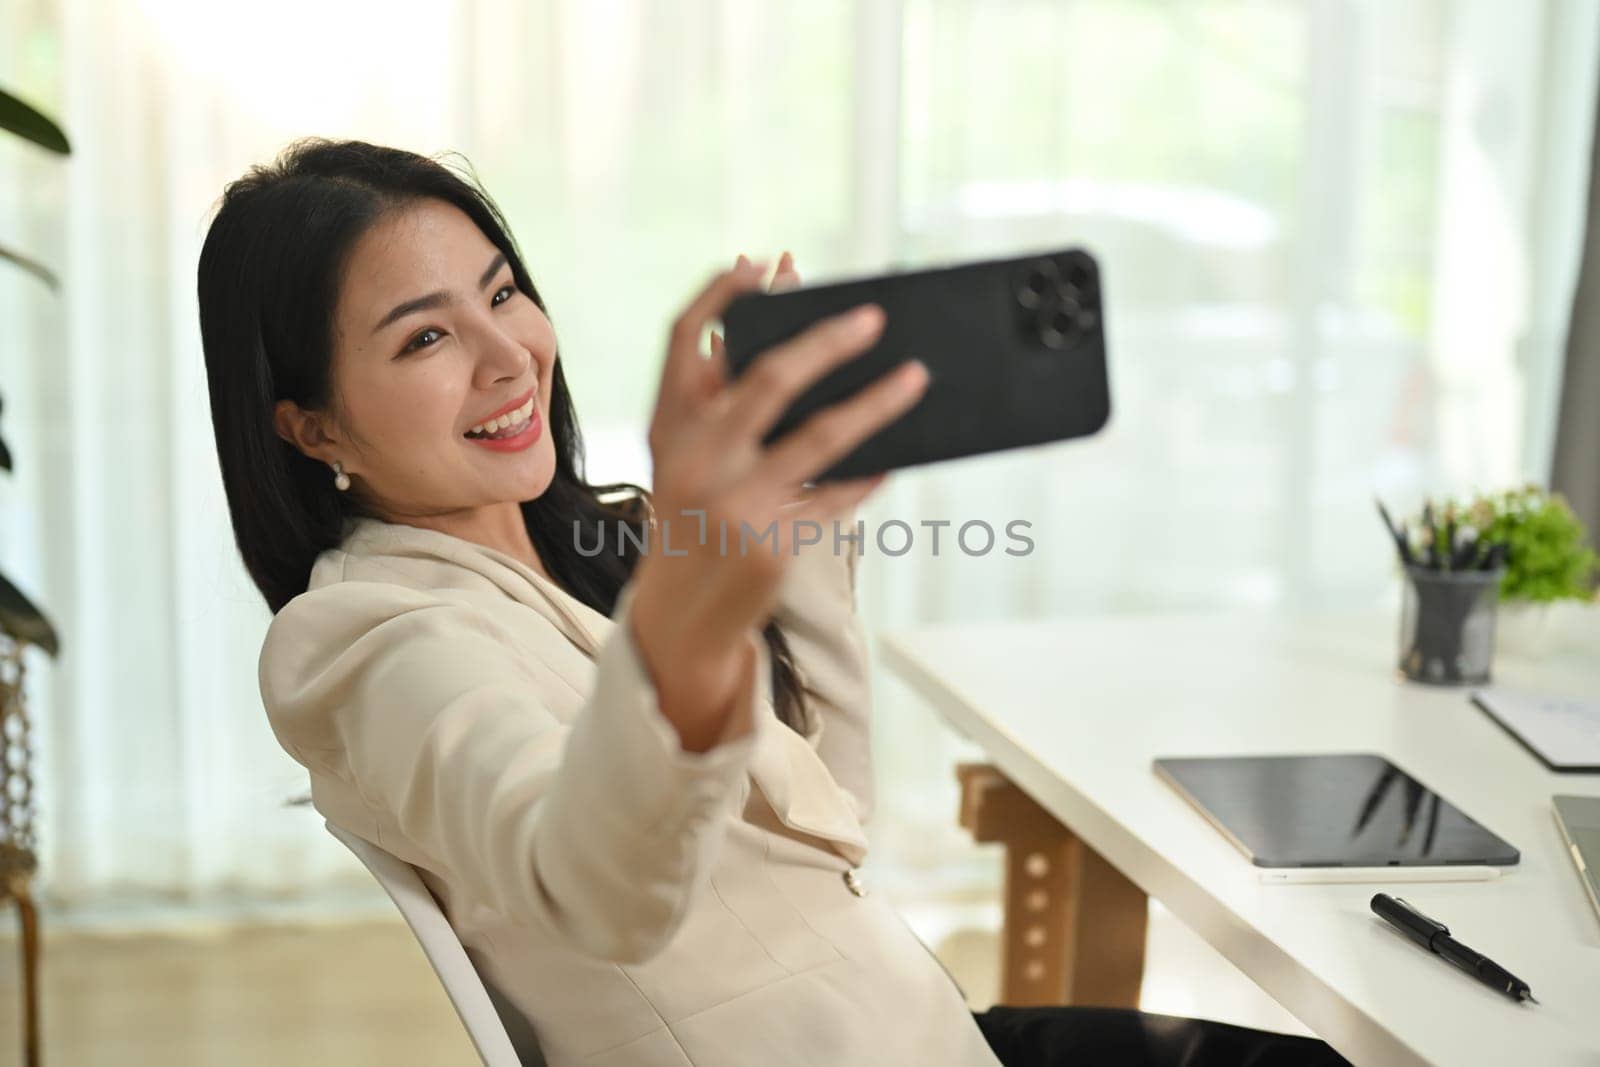 Cheerful young female entrepreneur making selfie or video call on her smart phone, sitting at working desk.